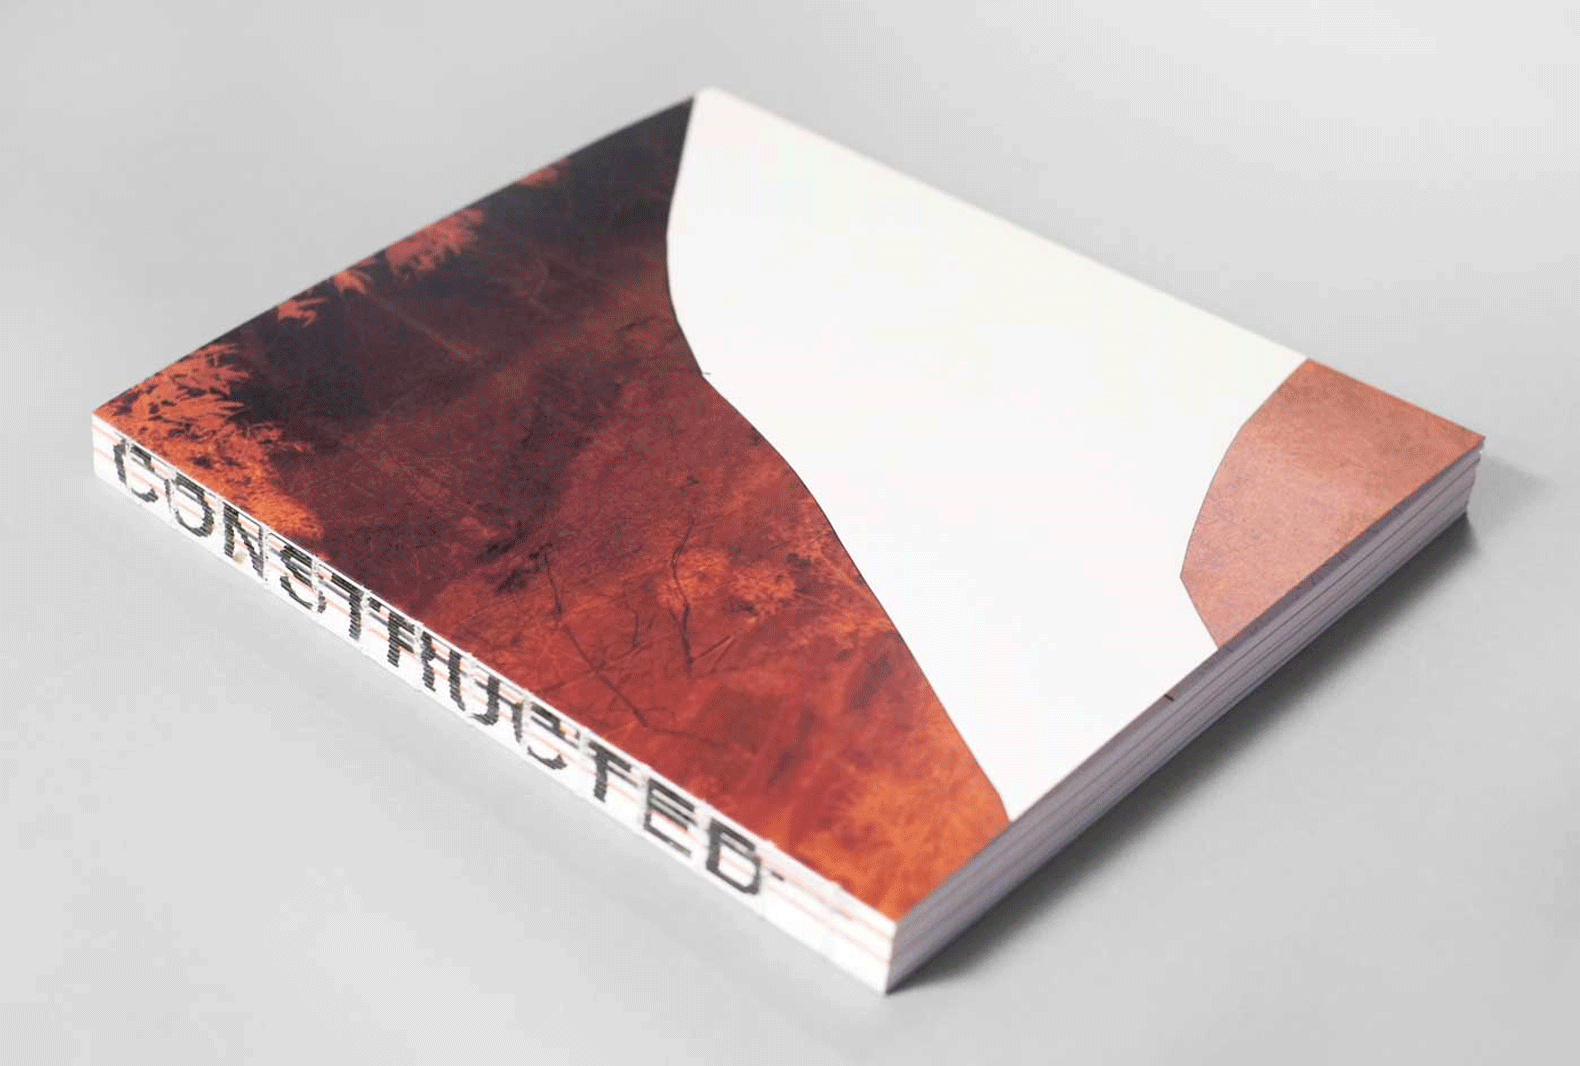 Constructed Landscapes, by Dafna Talmor, part of our pick of the best art books